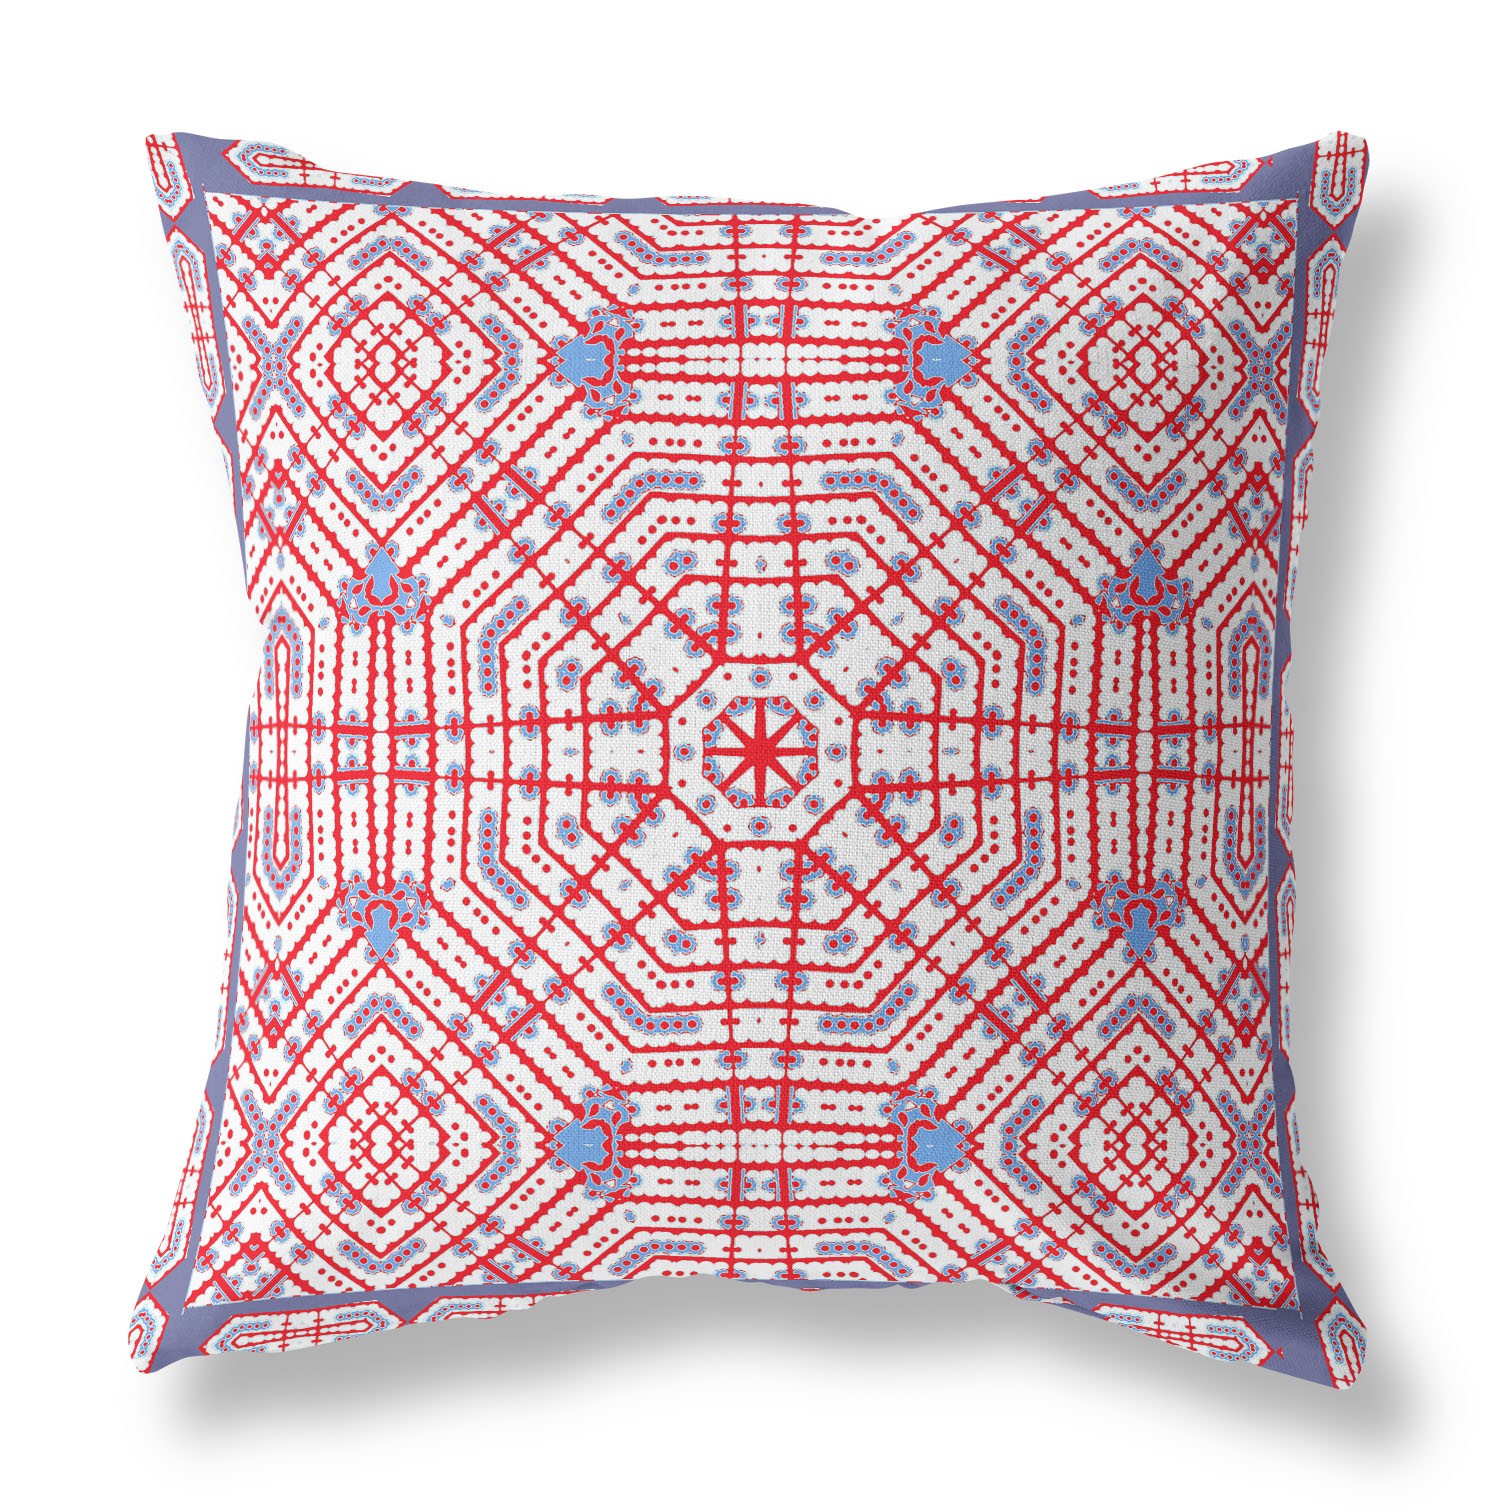 20” Red White Geostar Indoor Outdoor Throw Pillow-415008-1